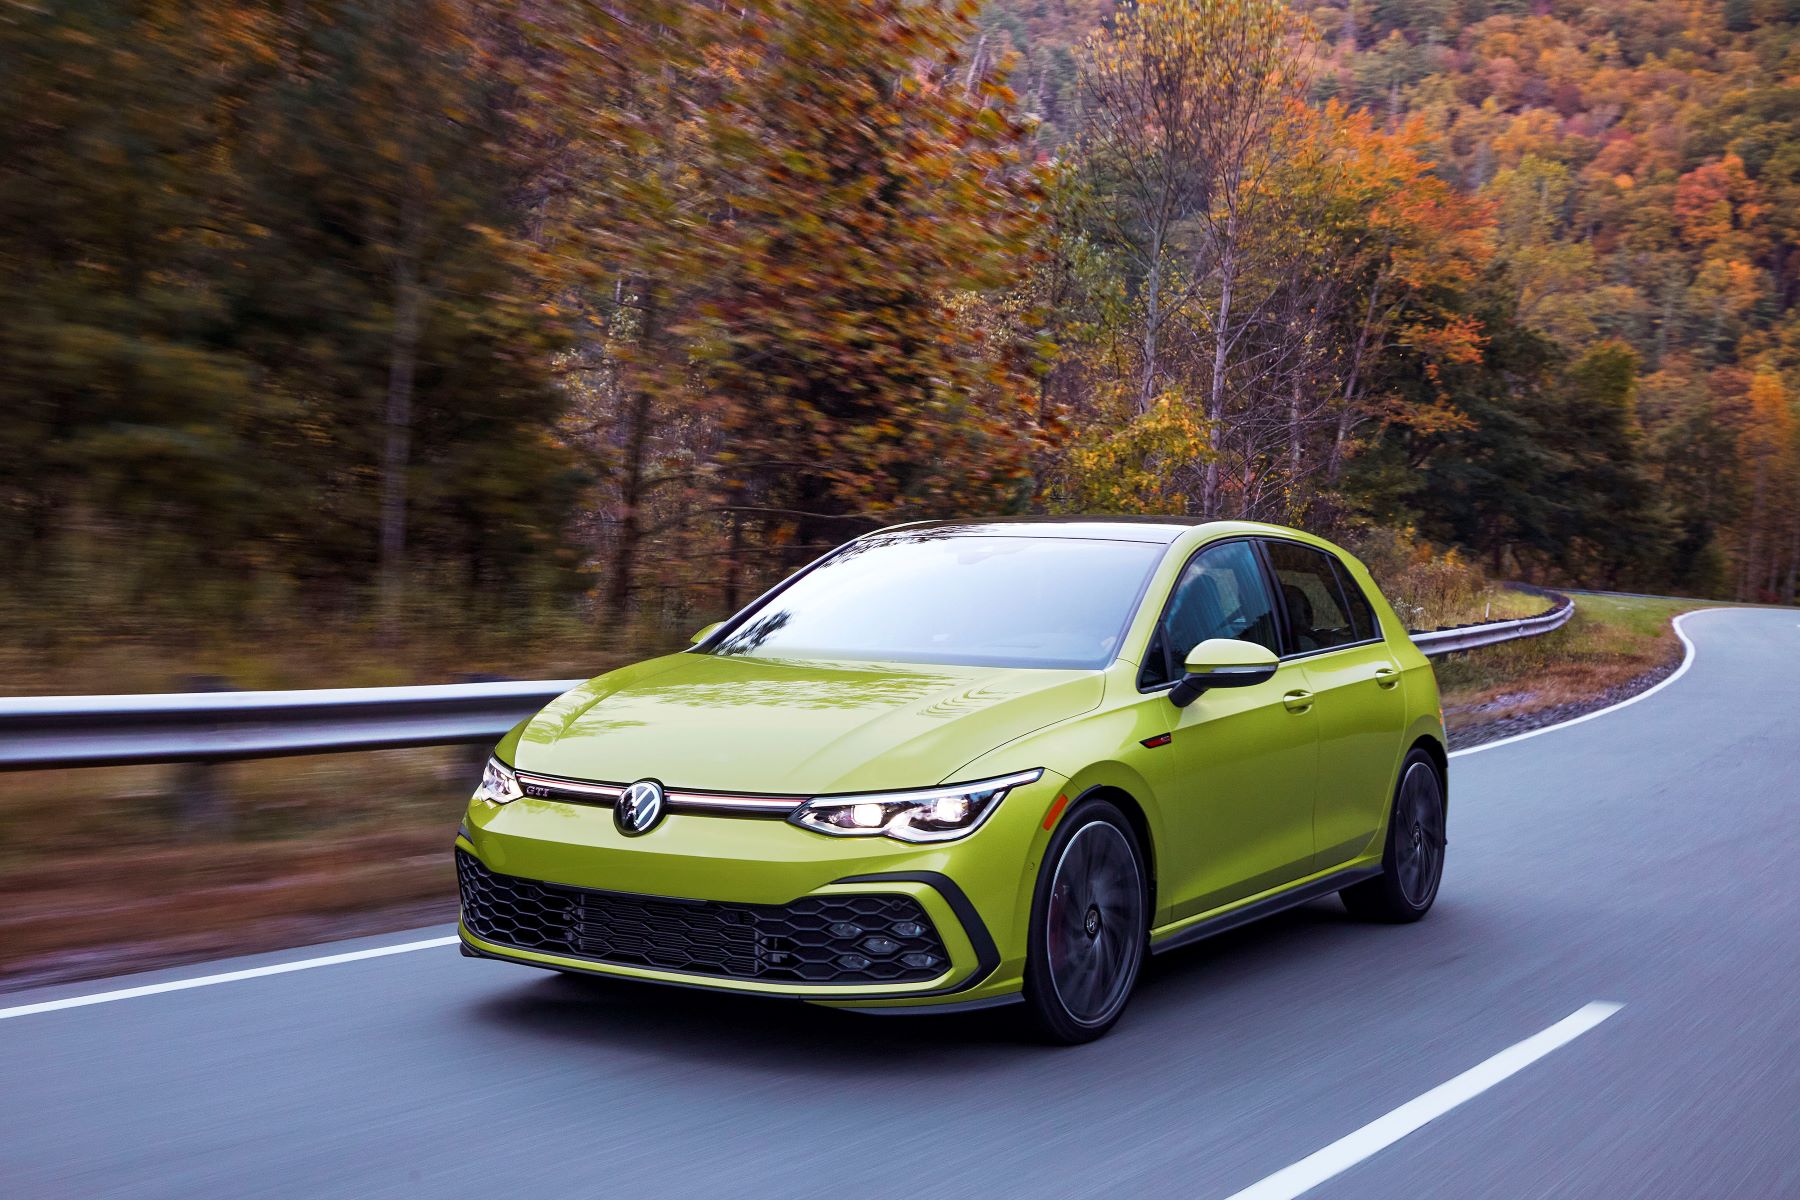 The 2022 Volkswagen Golf GTI performance 'hot' hatchback in yellow driving through a autumn forest highway